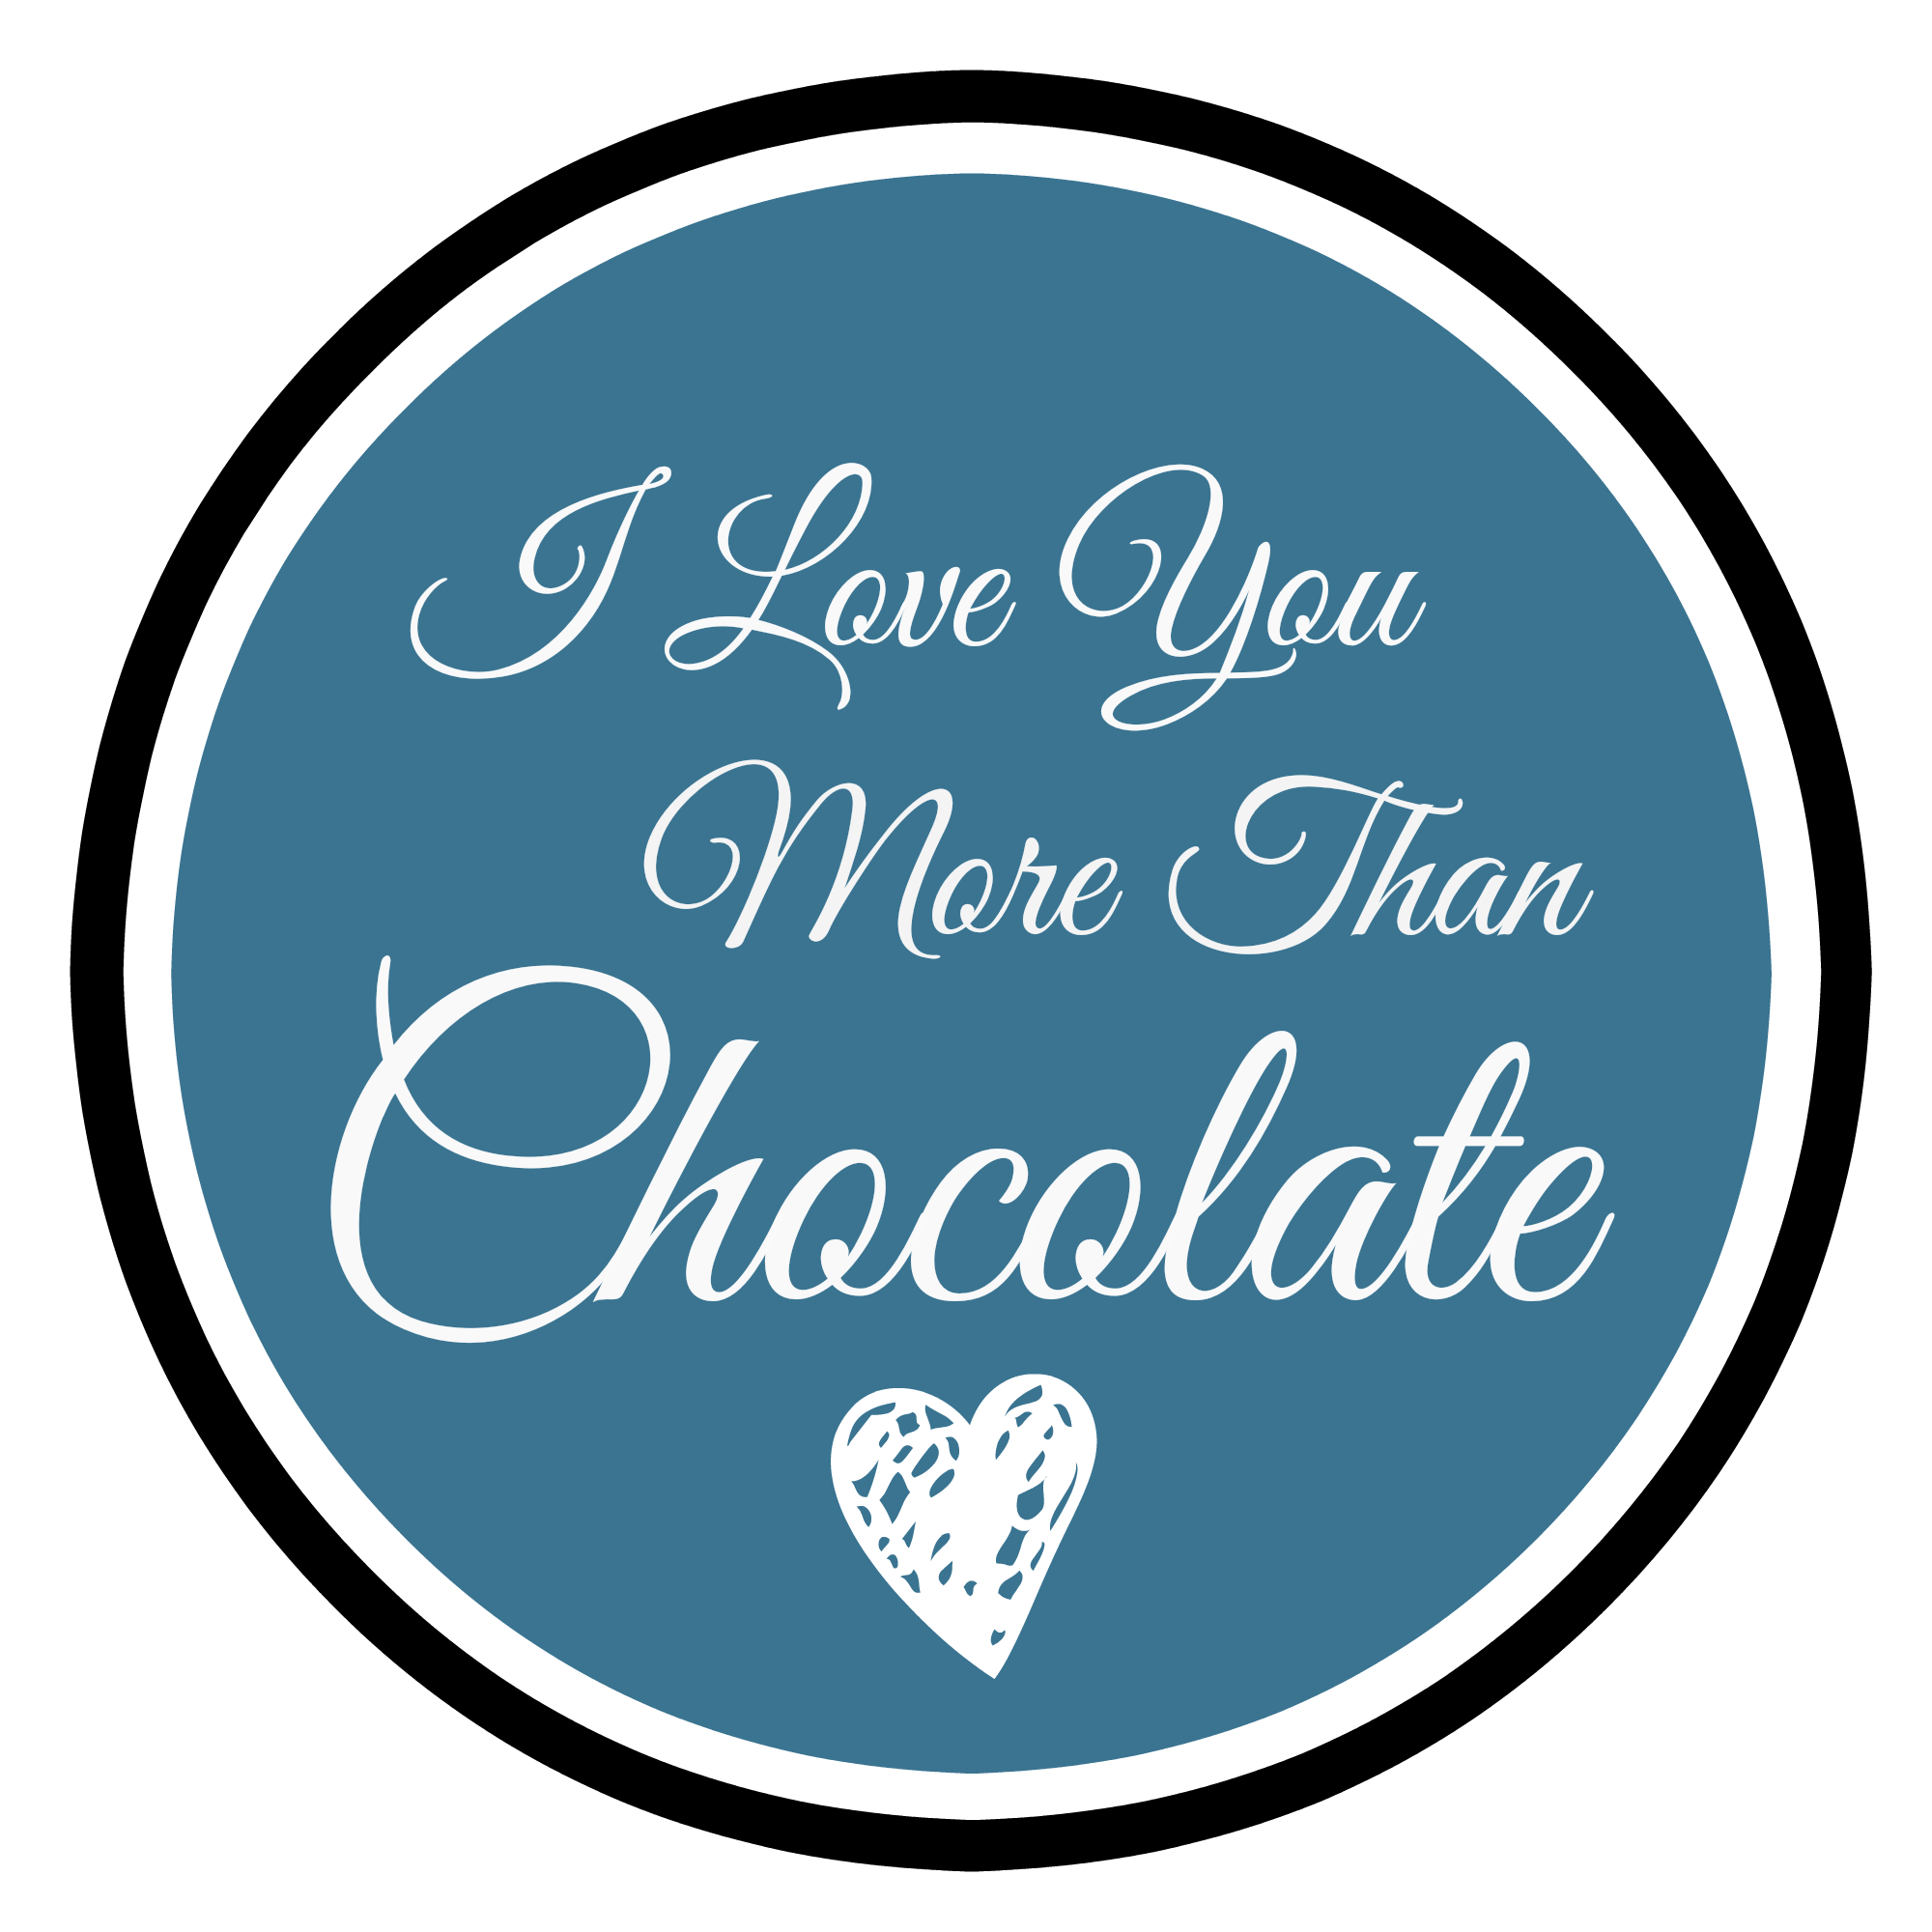 I Love You More Than Chocolate Gift Idea Crazy Little Projects